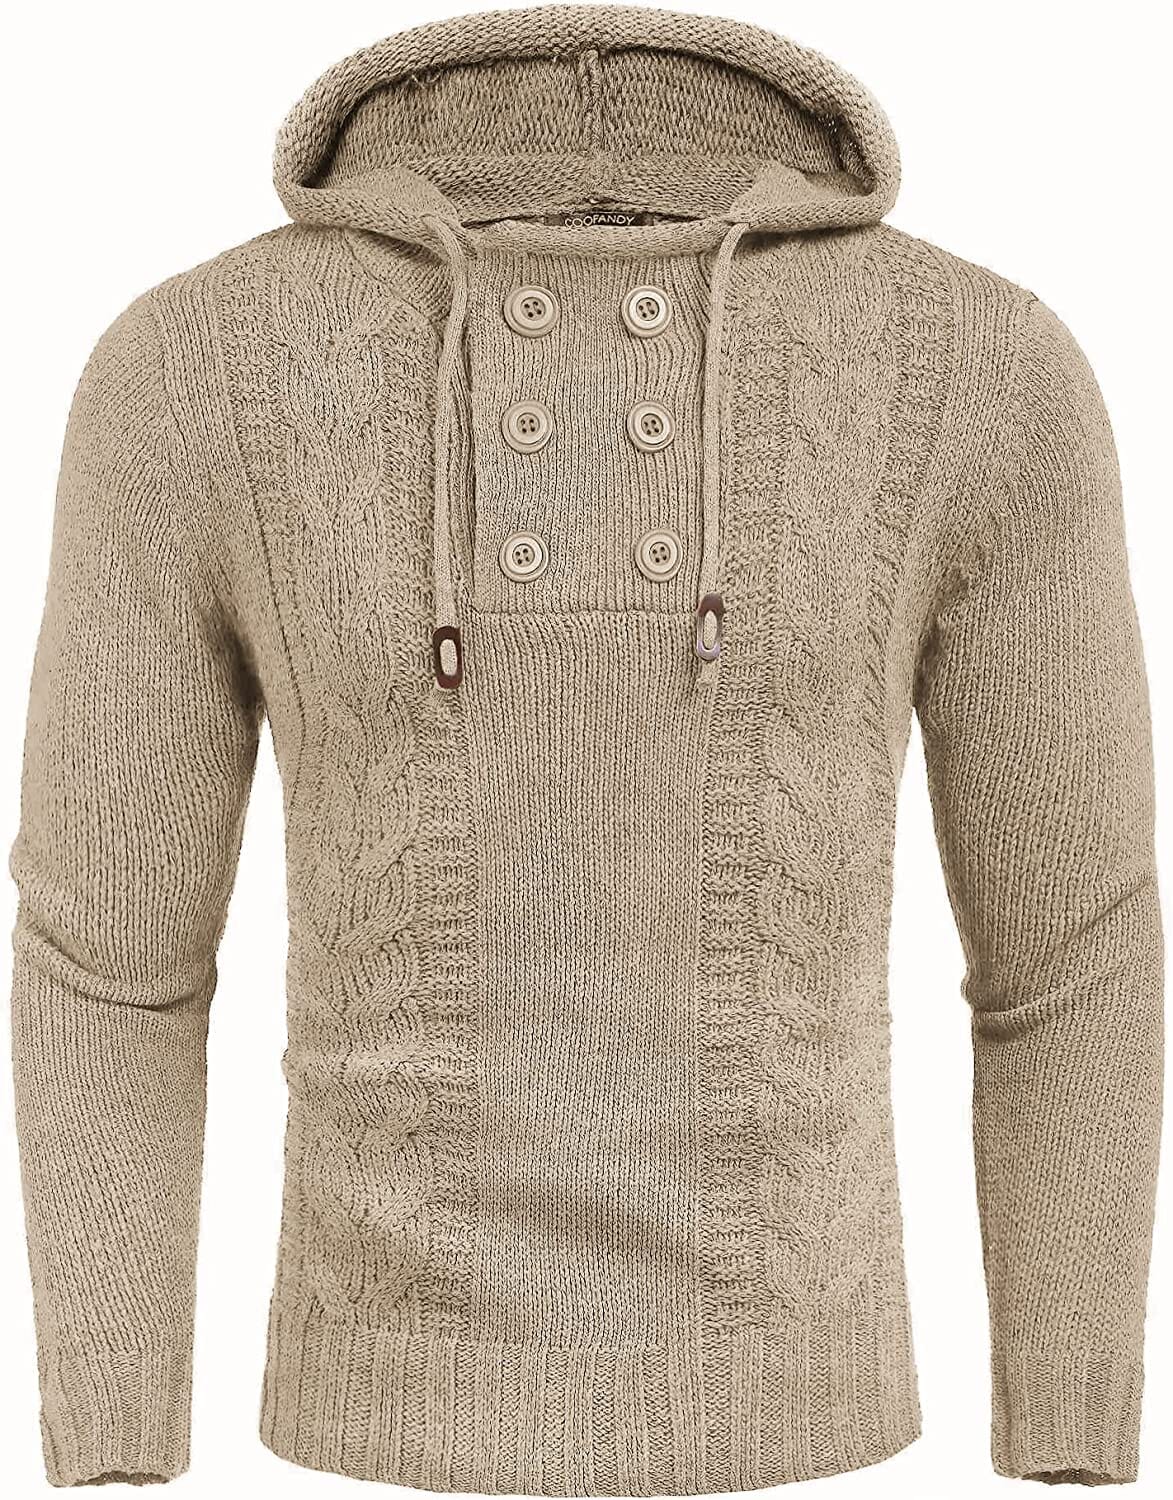 Casual Pullover Knitted Hoodies (US Only) Hoodies COOFANDY Store Light Khaki M 